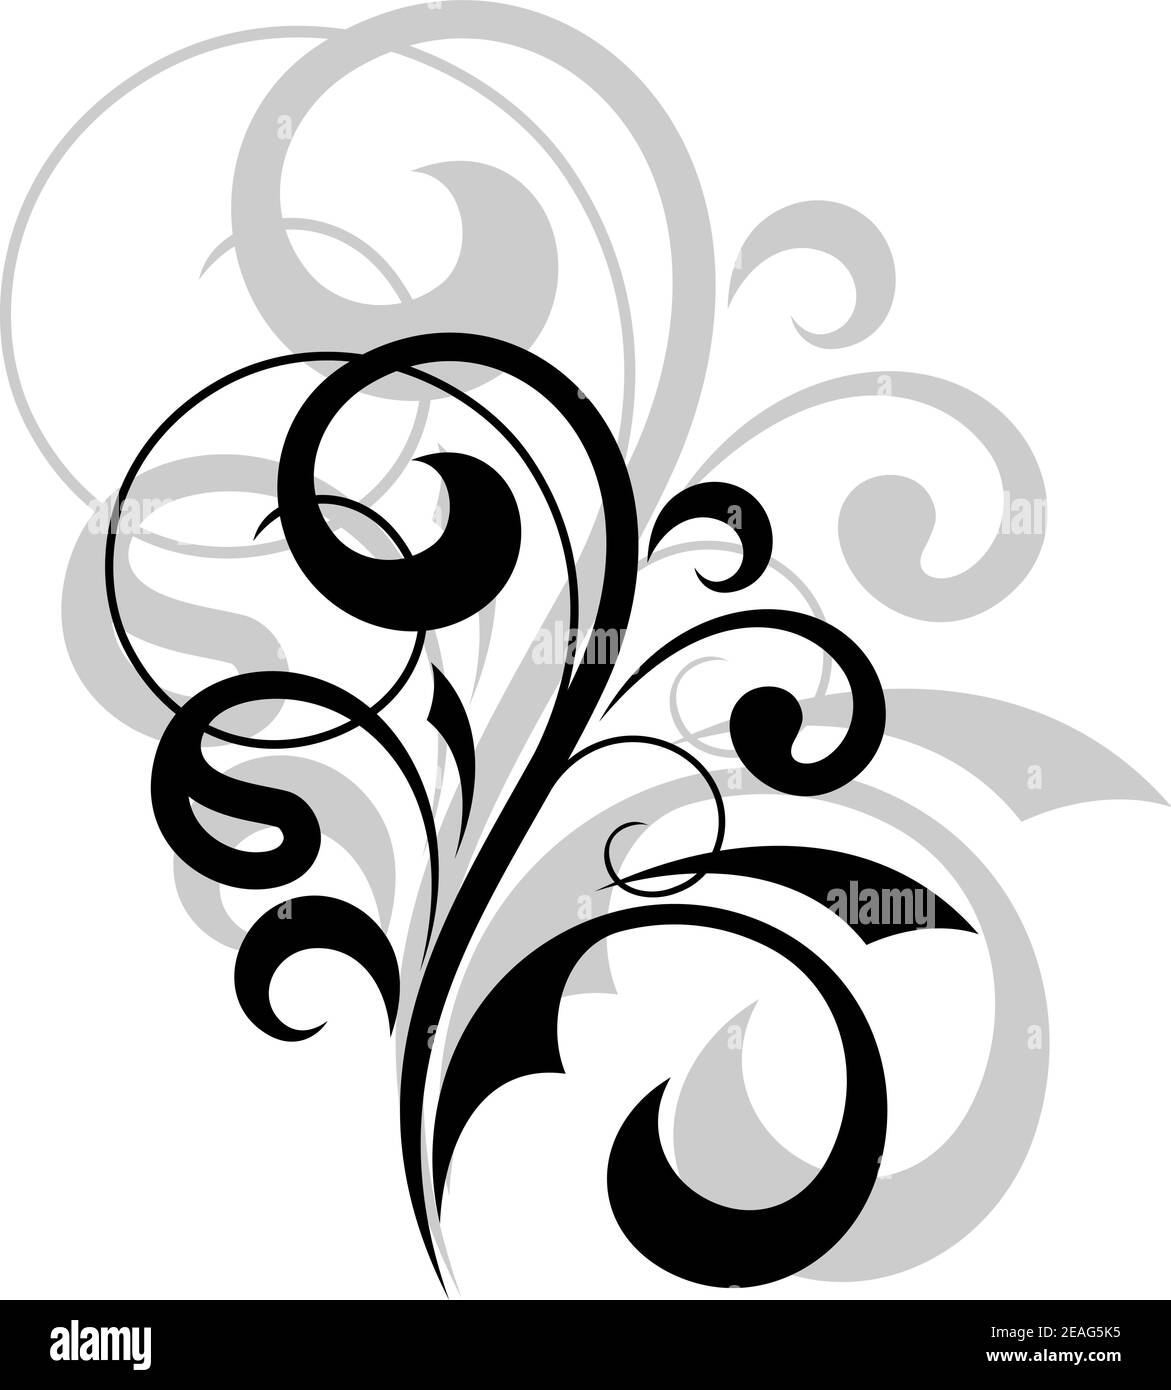 Ornate scrolling design element in black and white with an enlarged grey repeat or shadow behind it Stock Vector